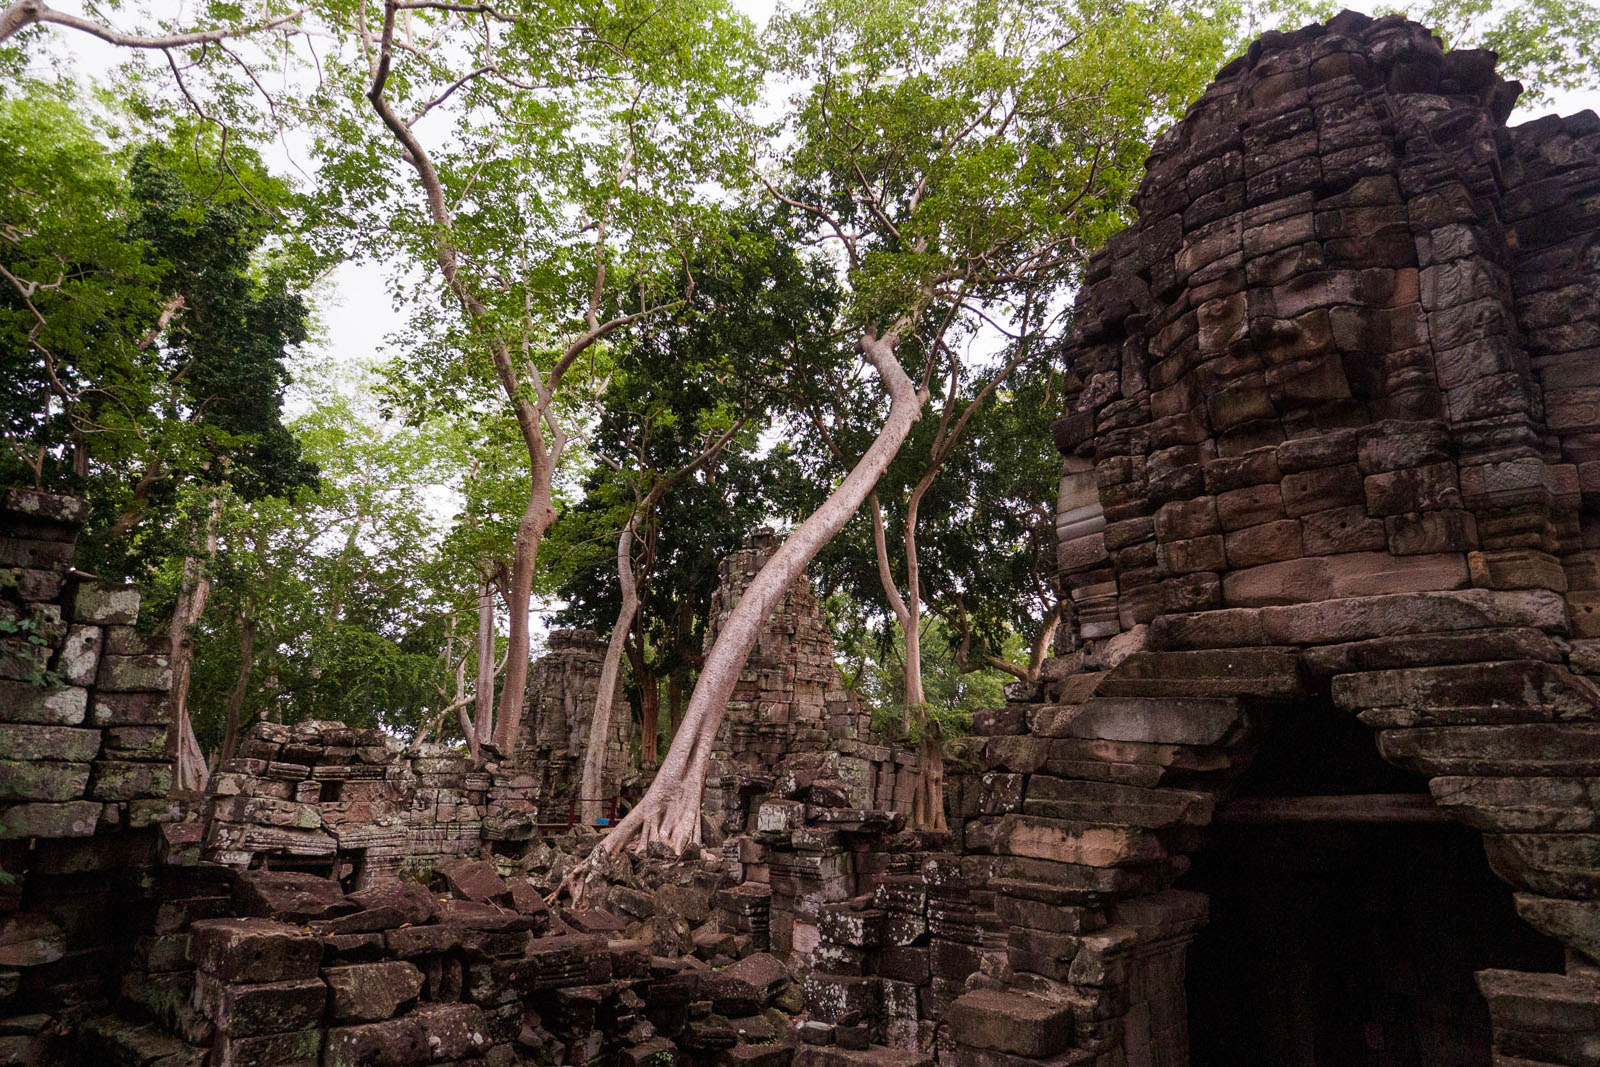 Banteay Chhmar Community-Based Tourism